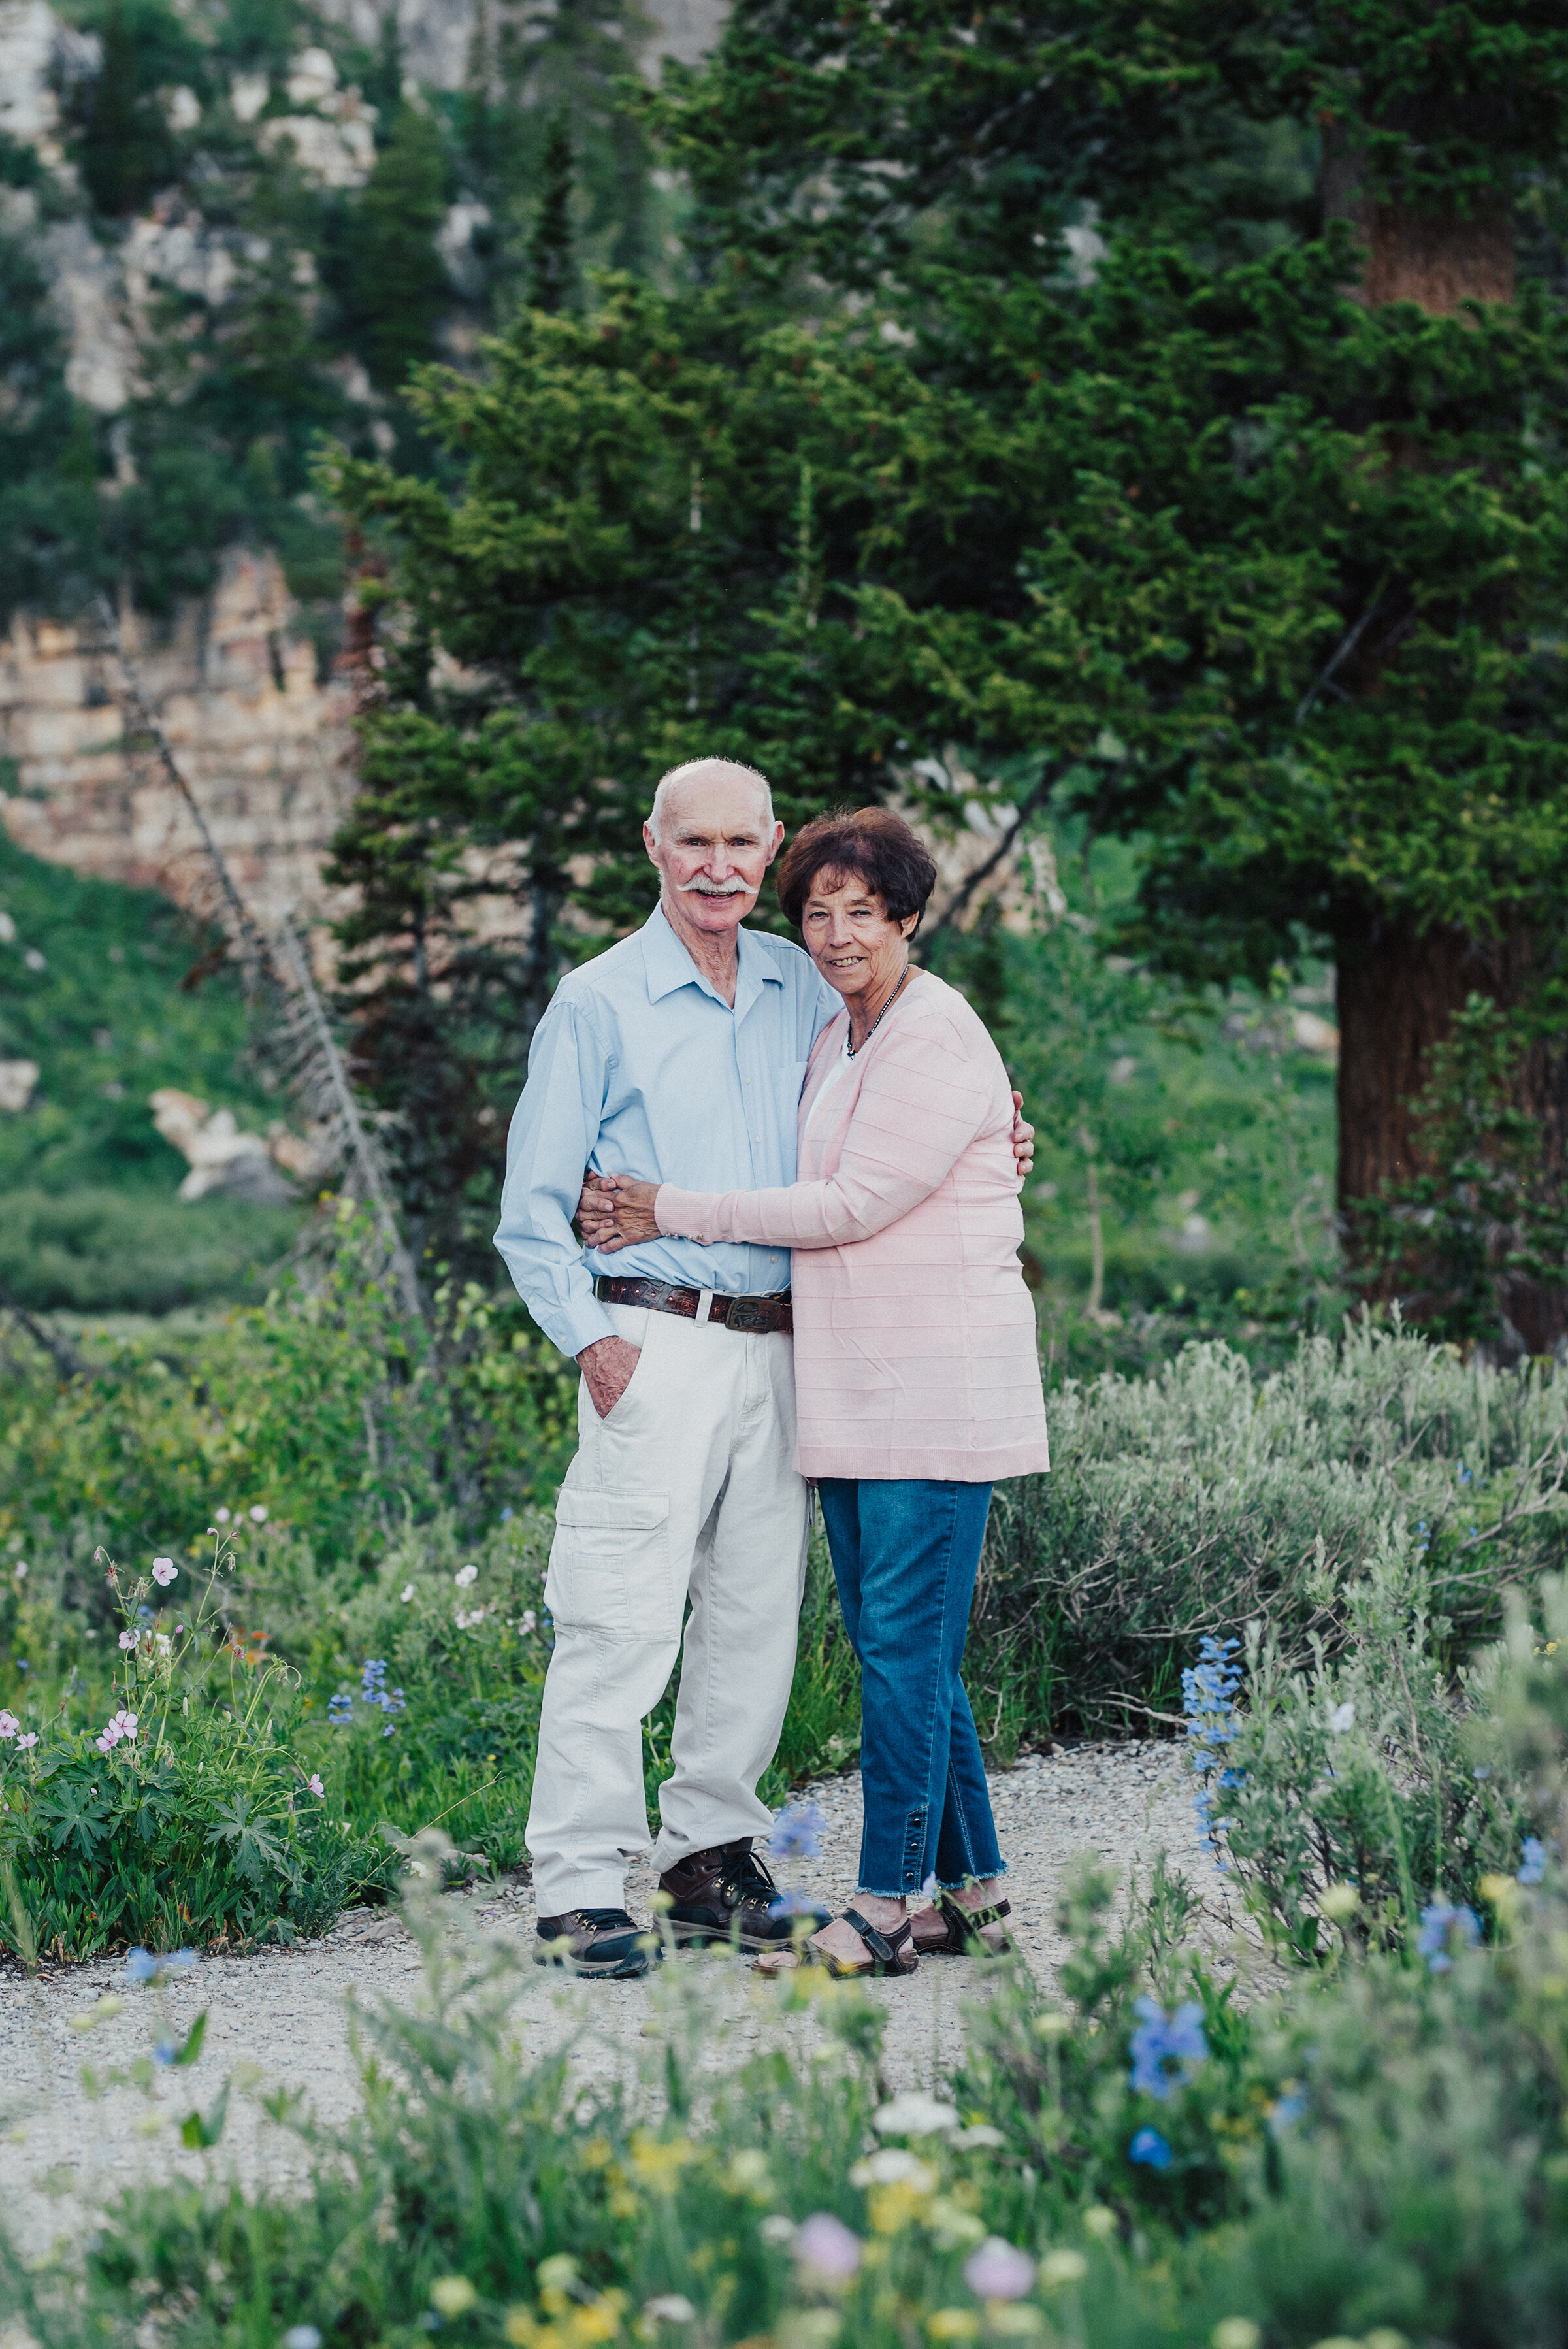  Sweetest grandma and grandpa surrounded by wild flowers up Logan canyon for this lovely family photo session. Logan Utah family photographer Kristi Alyse photography Tony Grove forest nature photos Logan canyon light blue family photos wild flowers grand parents children parents spouses reunited dreamy scenic photo shoot #kristialysephotography #utahphotographer #familyphotography #logancanyon #familyphotos #forest #wildflowers #northernutah #familyportraits #family 